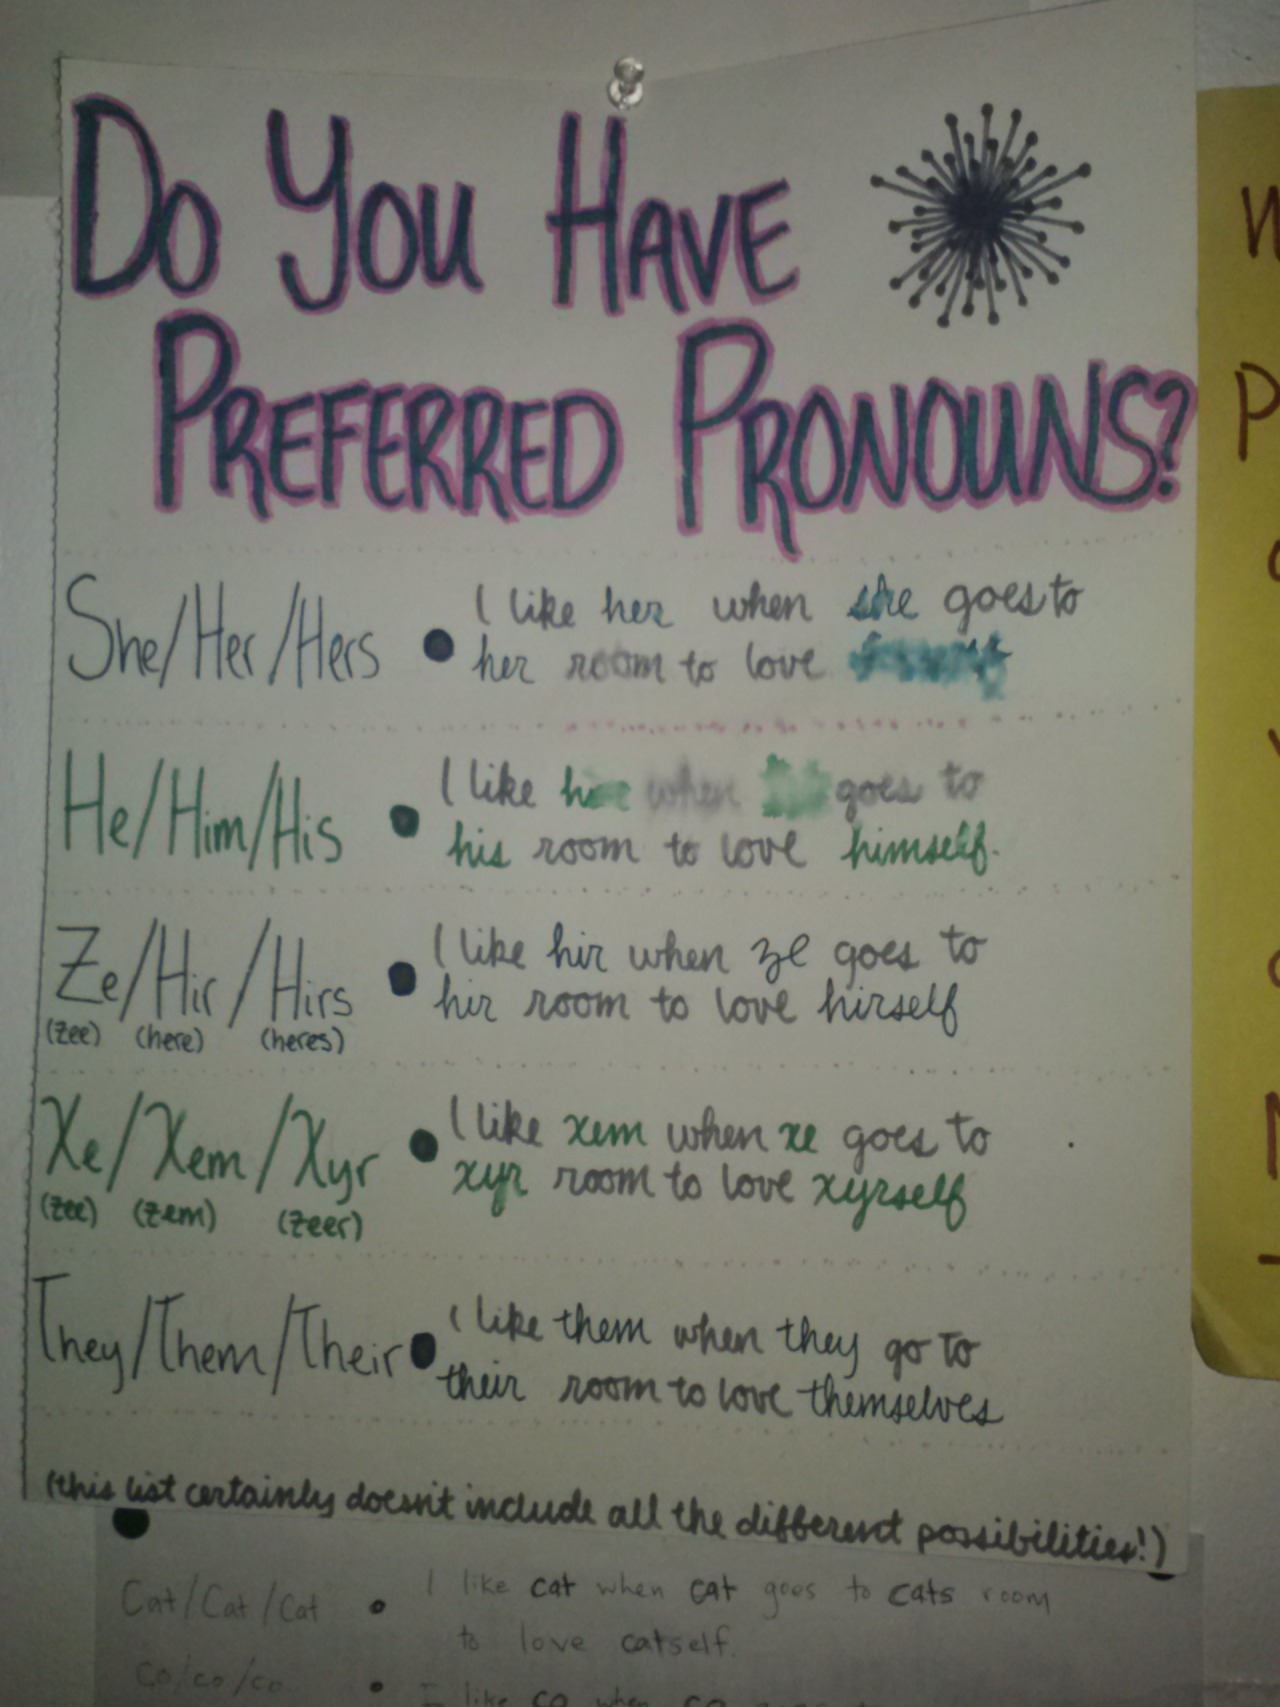 Photograph of poster advocating respect for preferred gender pronouns.